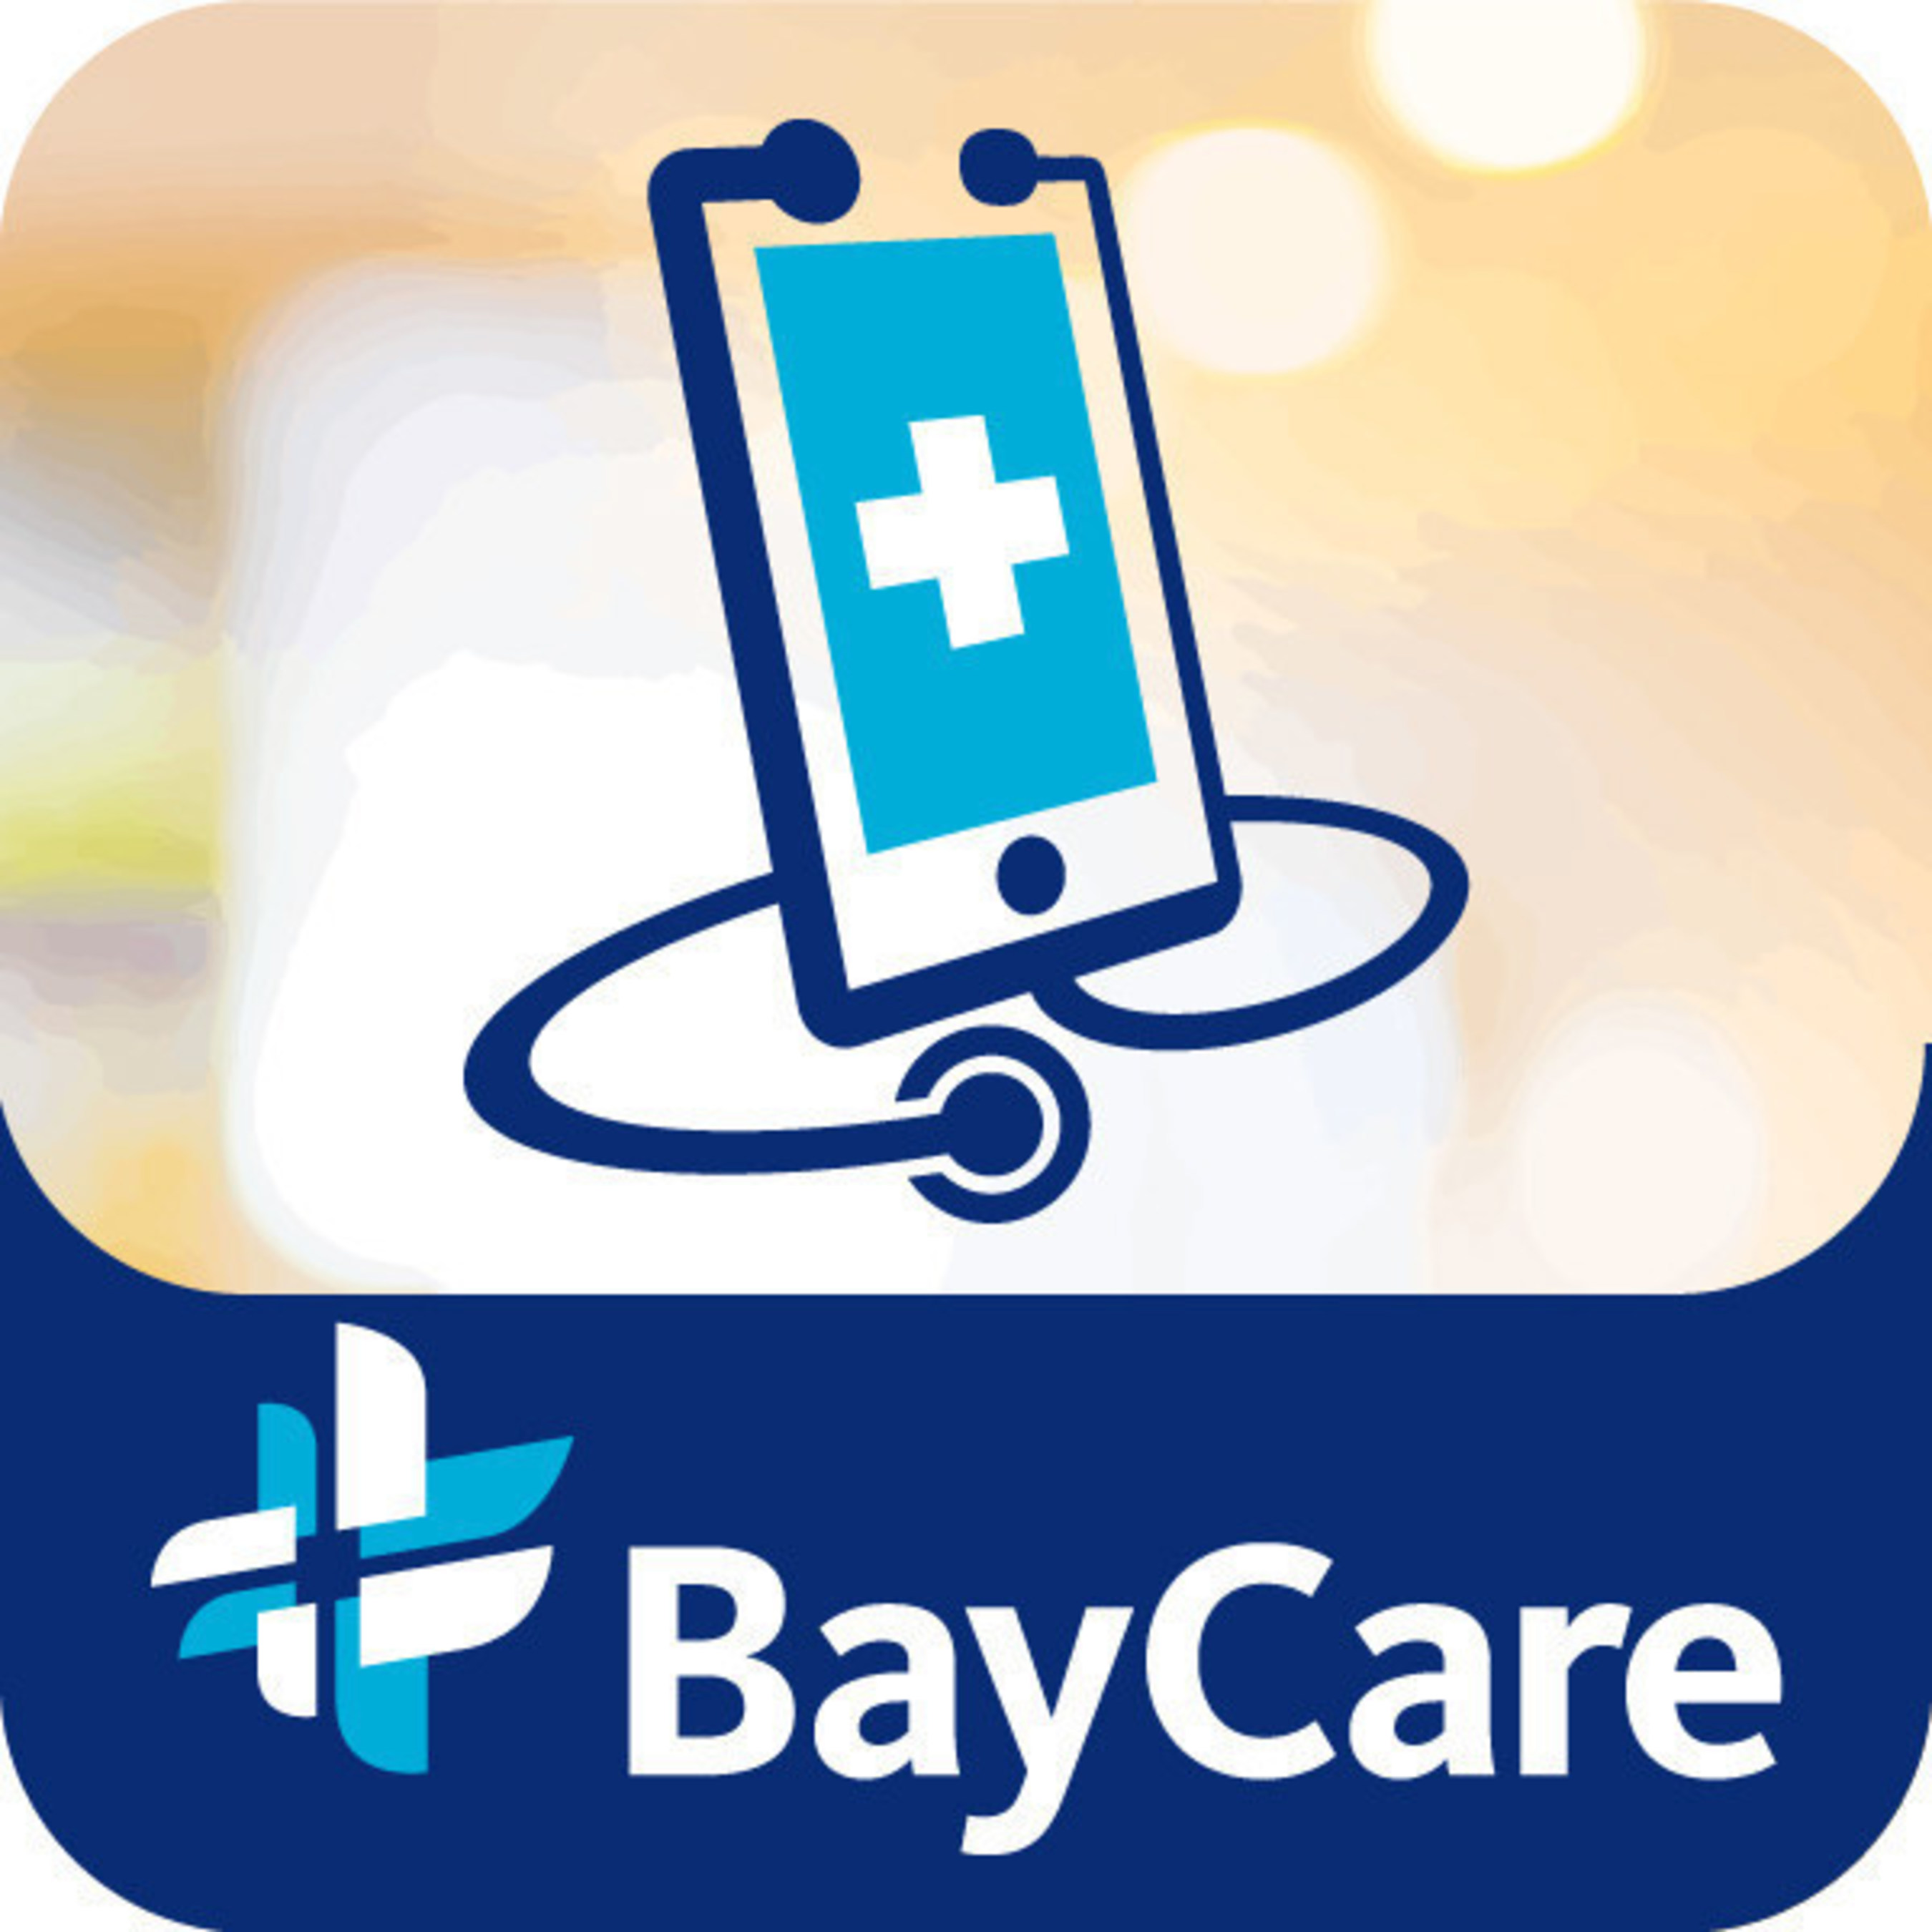 BayCare Anywhere APP ICON for smartphones, computers and iPads.